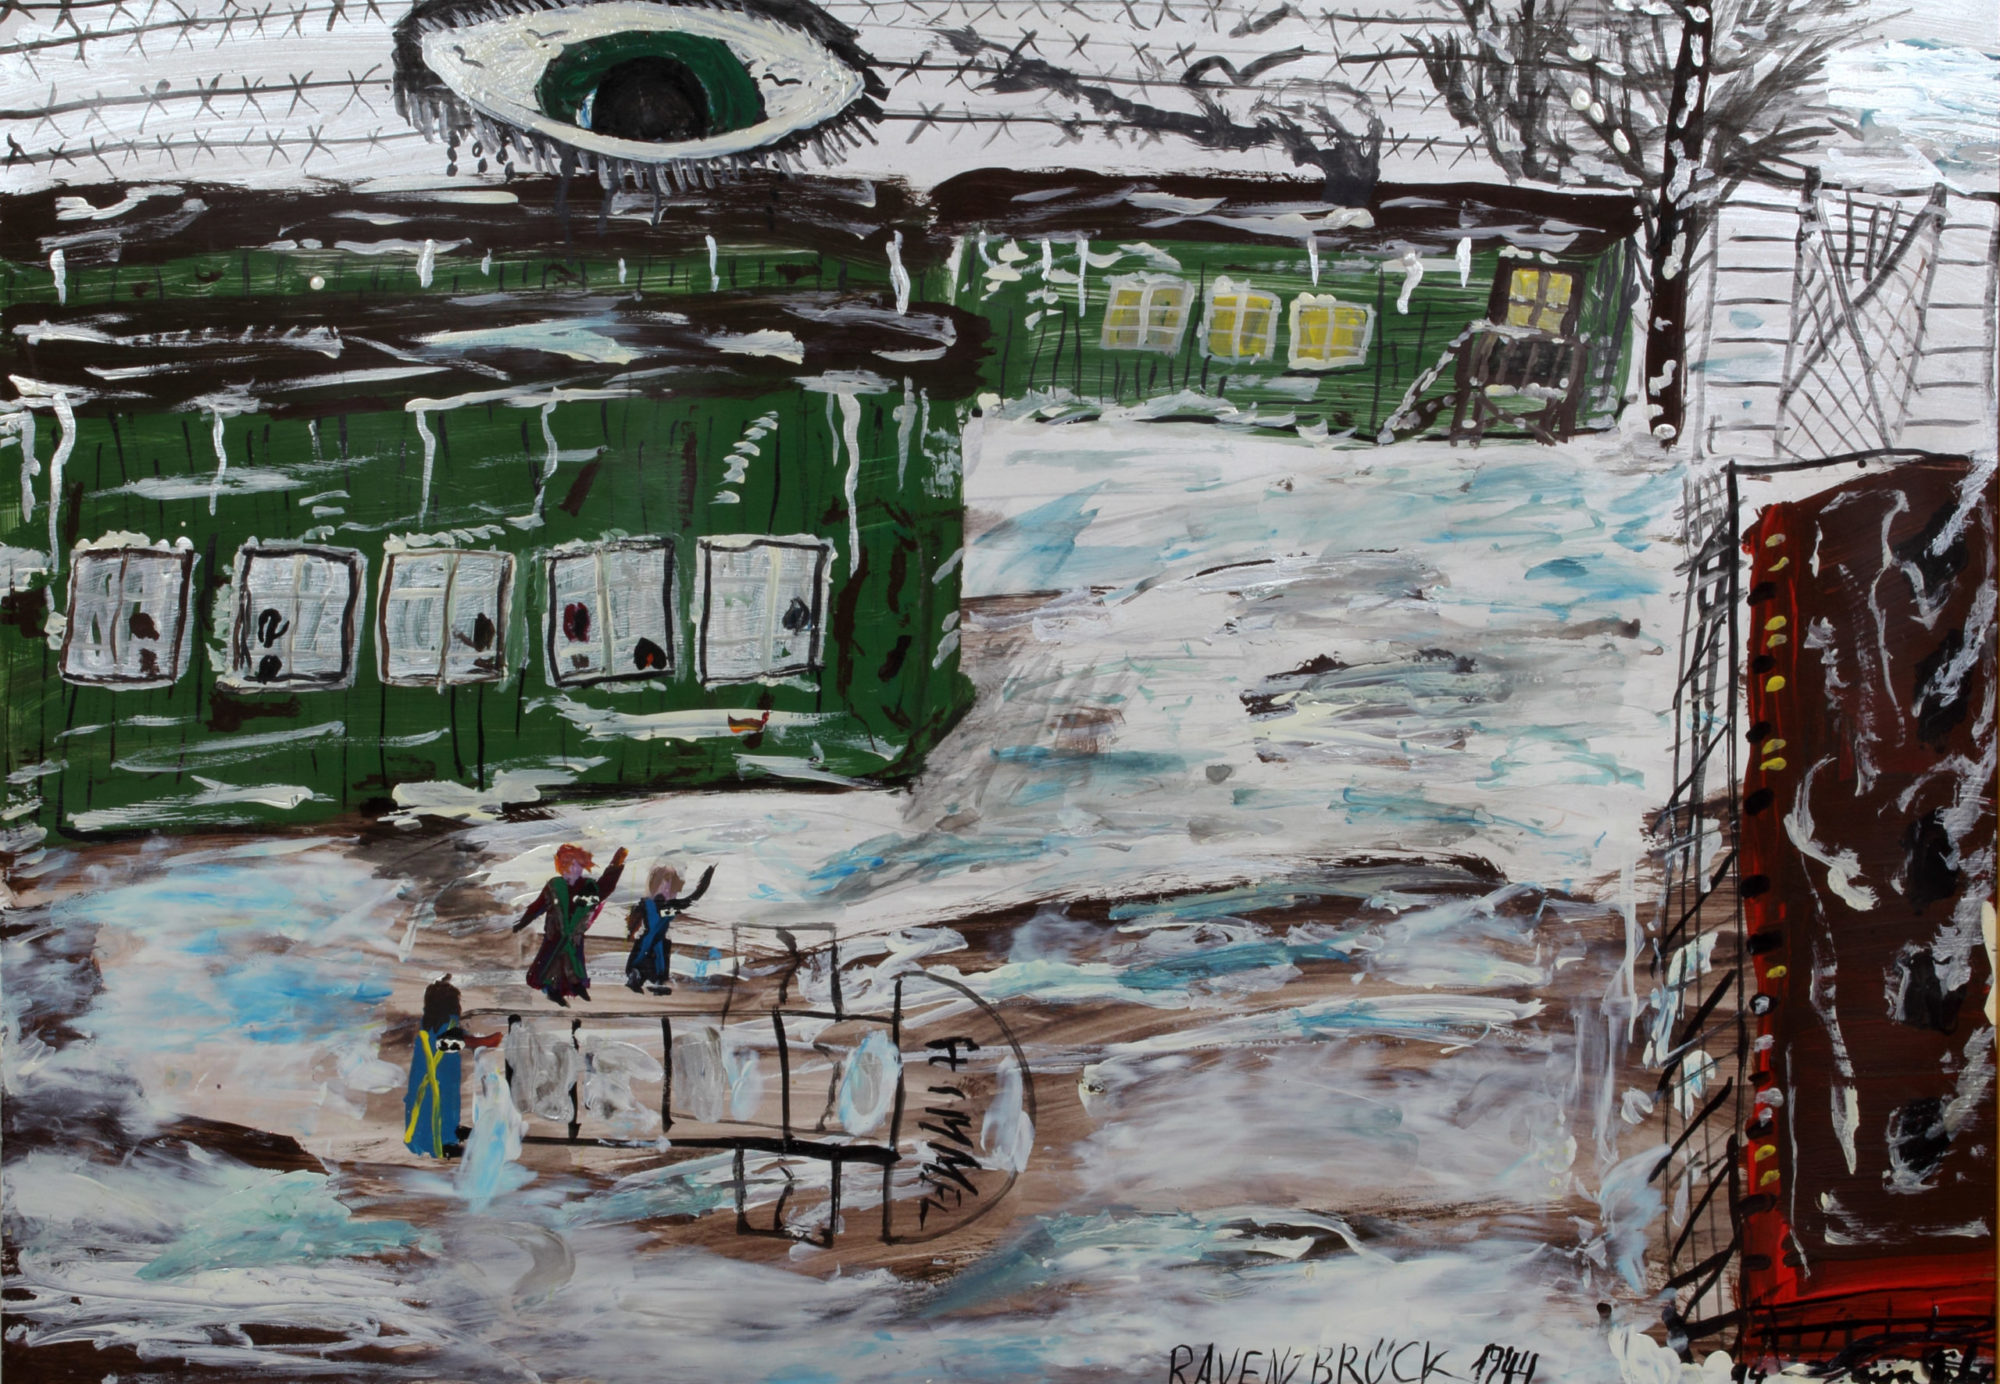 A winter scene painting depicting the all women‘s concentration camp at Ravensbrück.